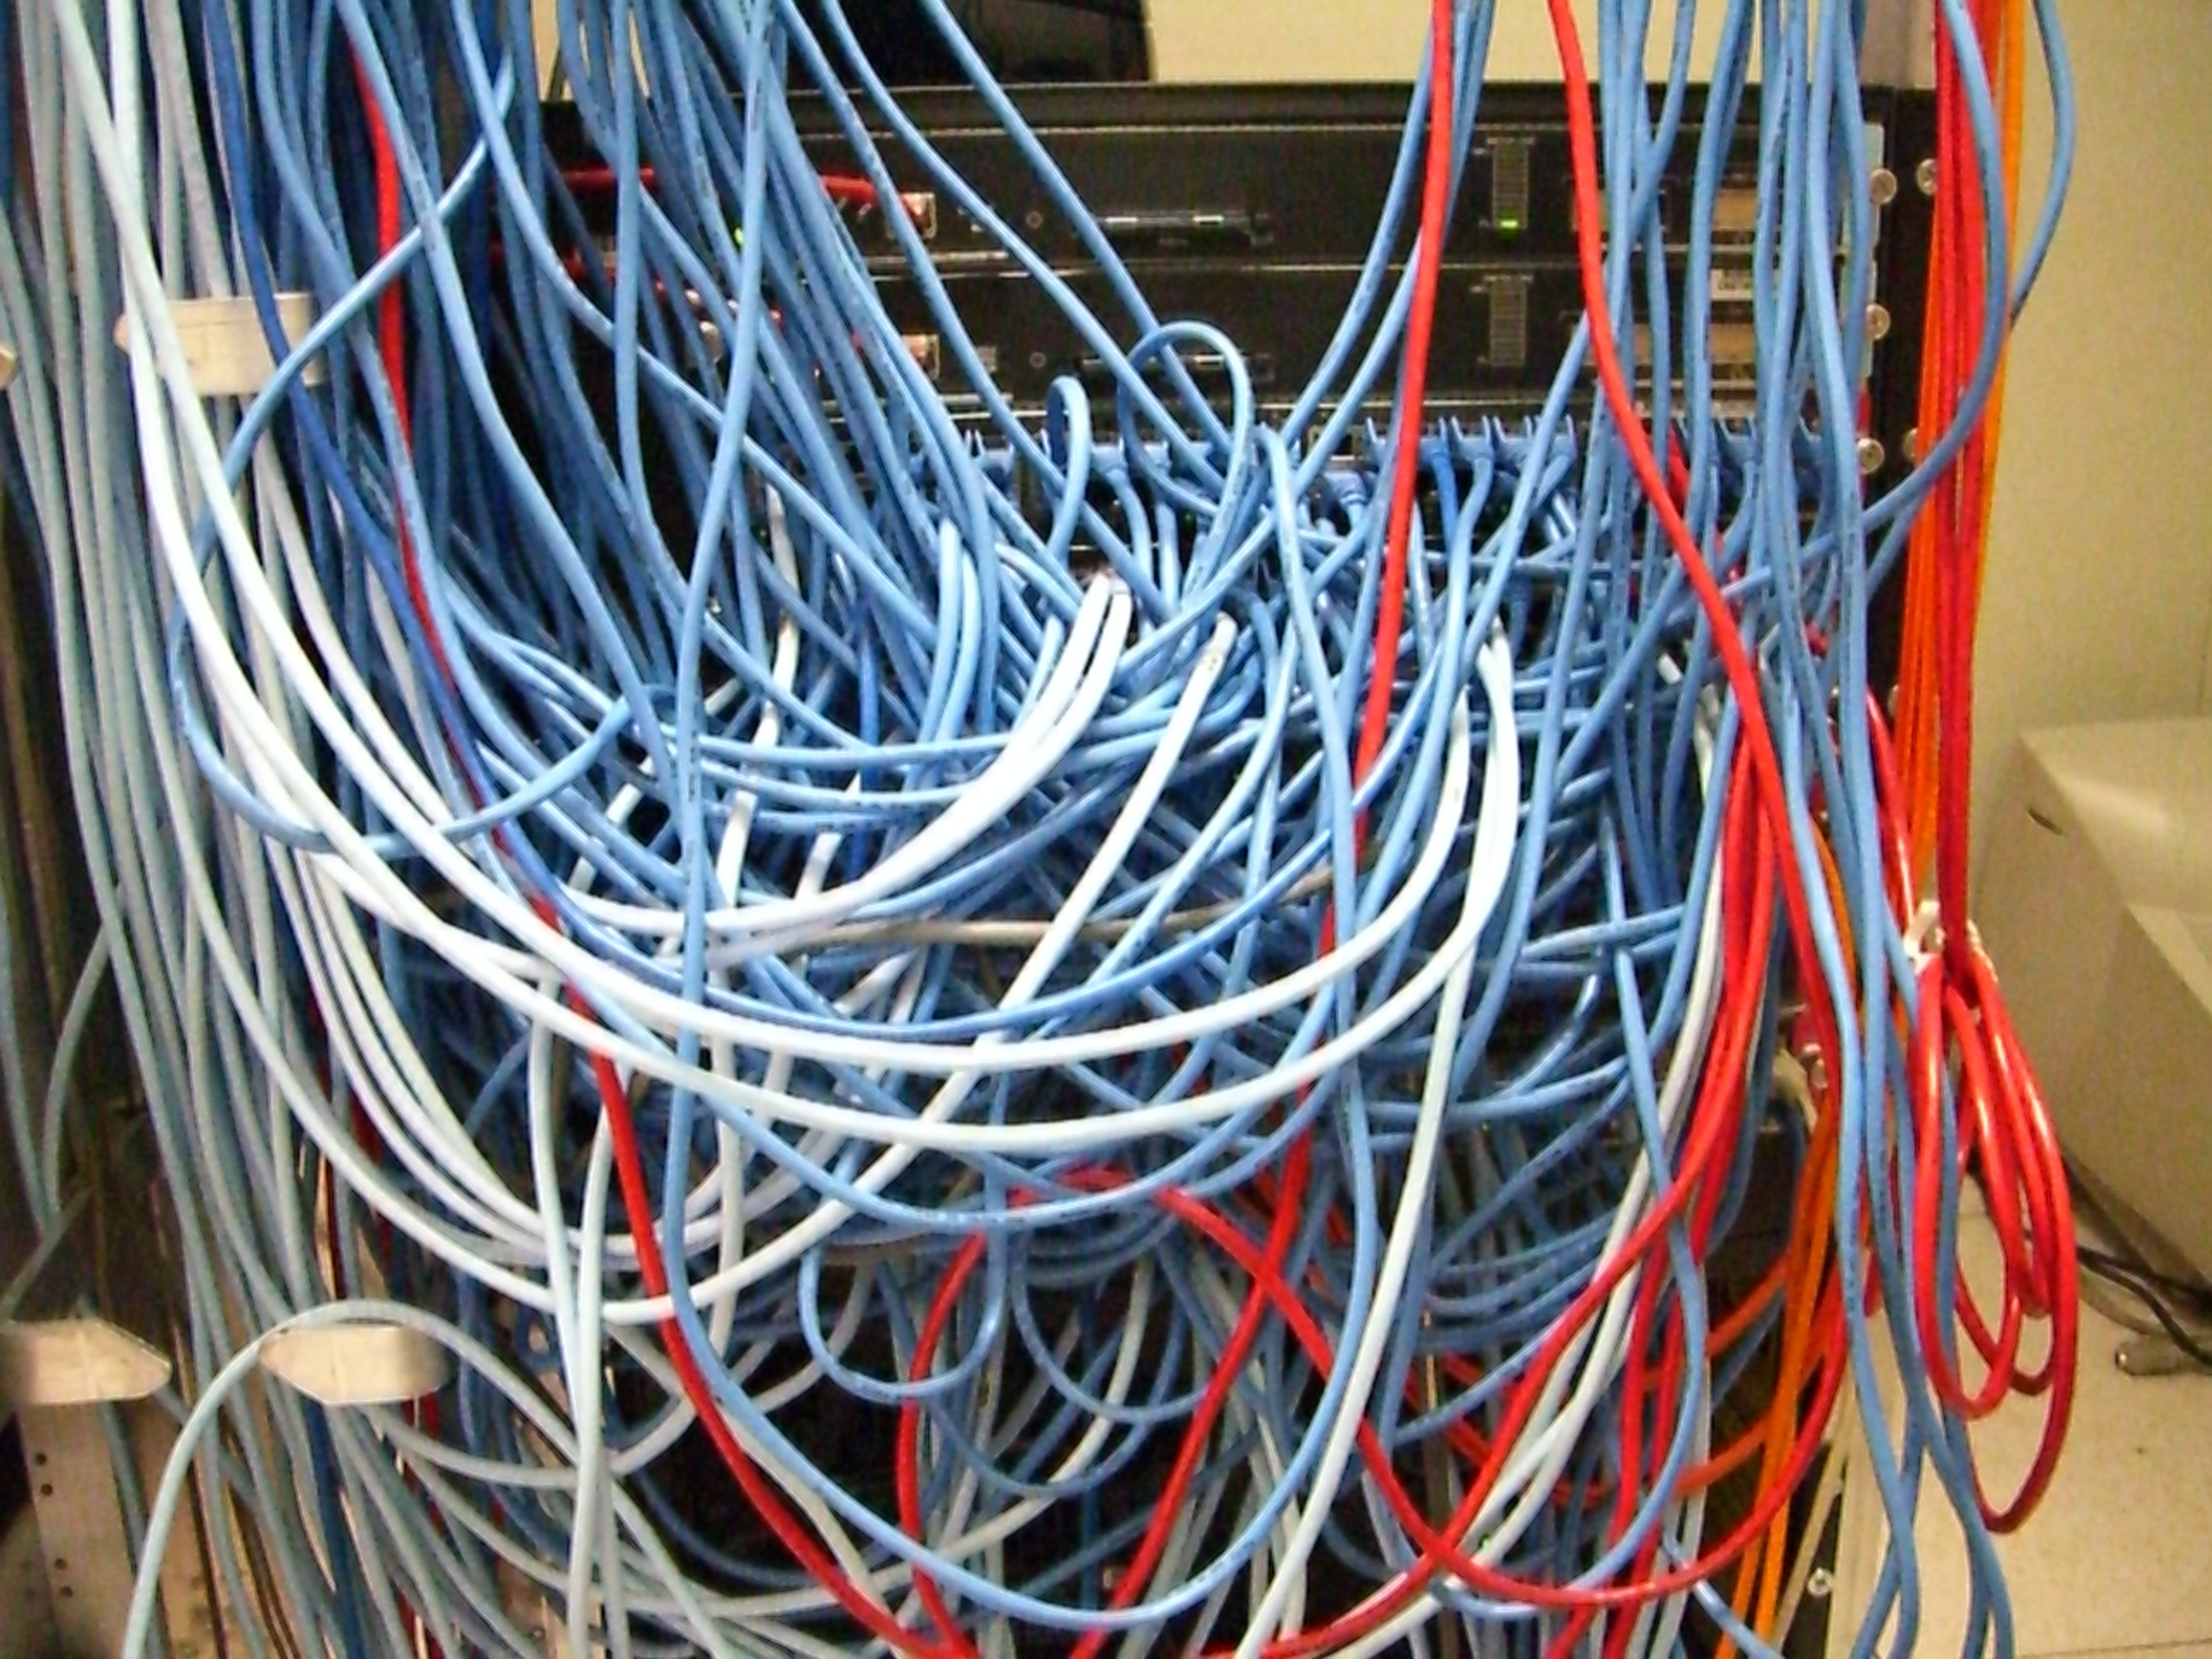 Network cables and server racks